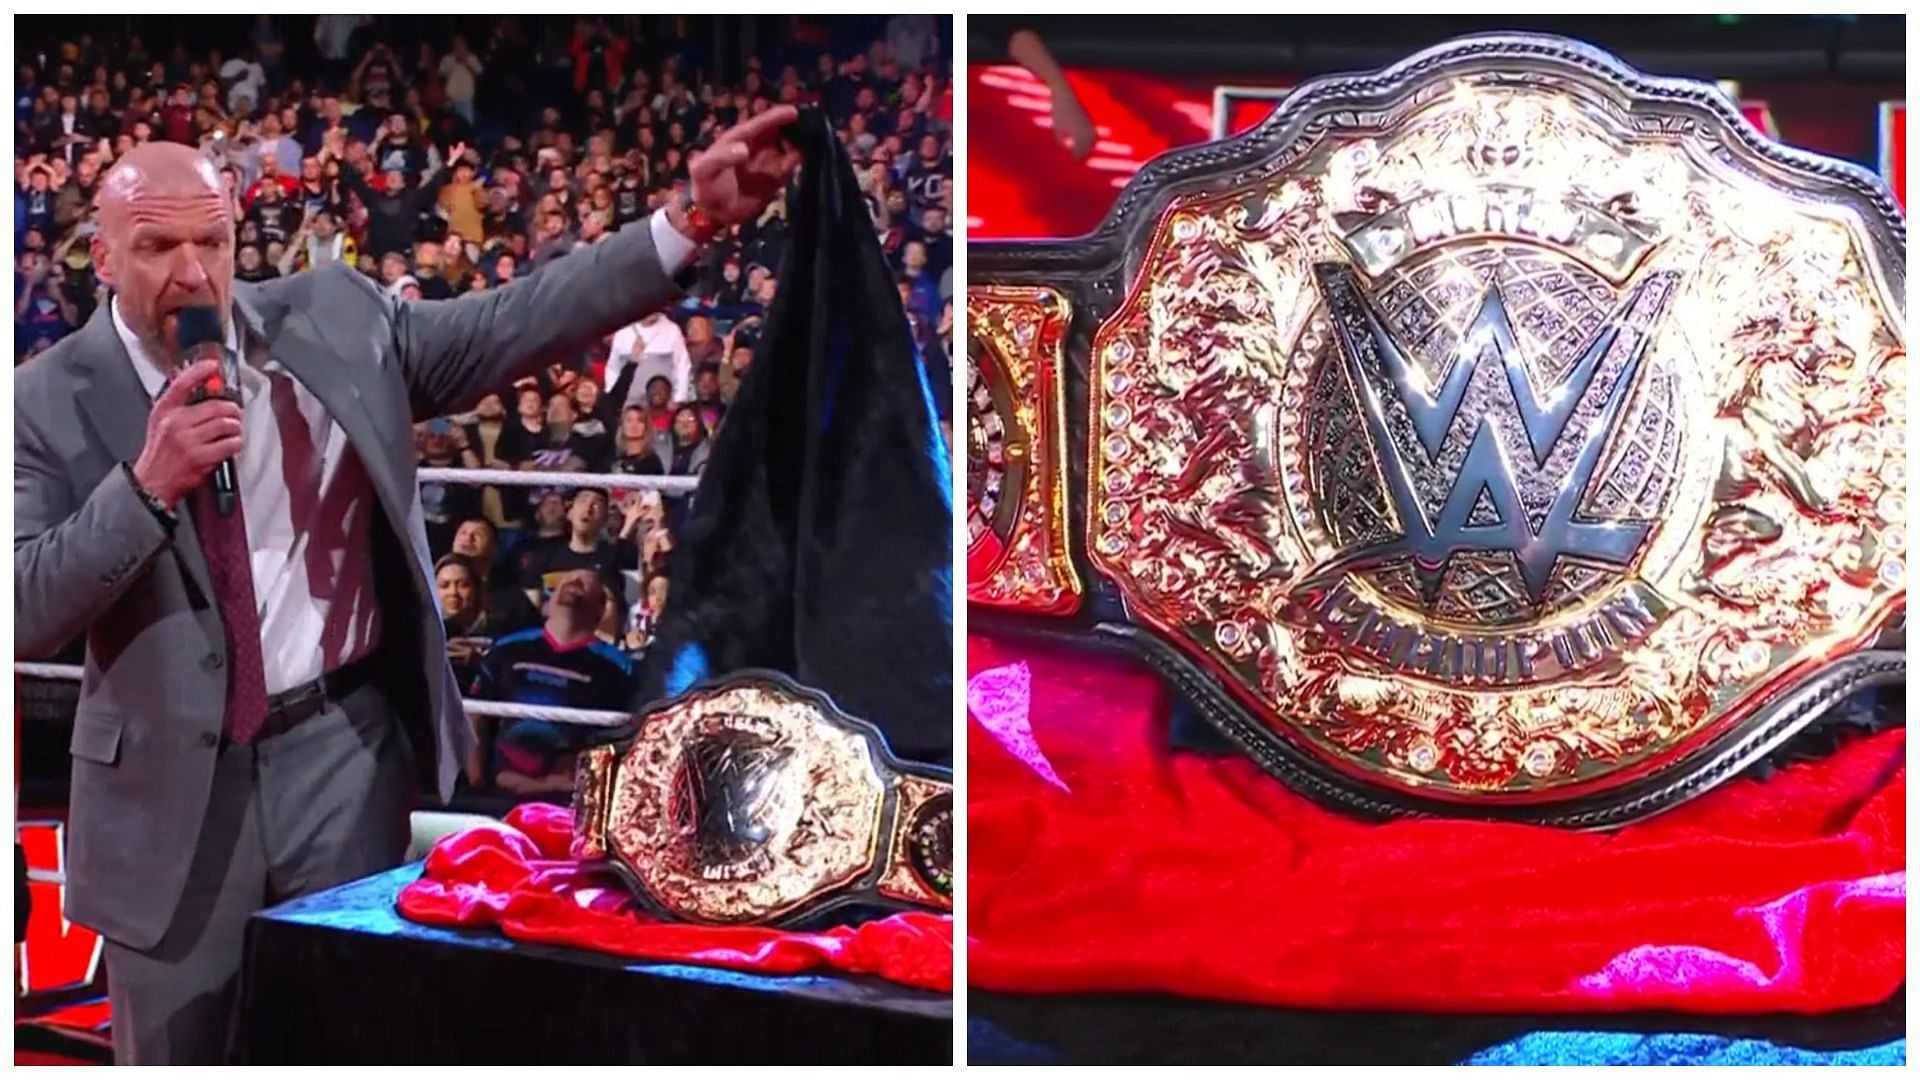 Triple H introduced the new WWE World Heavyweight Championship.